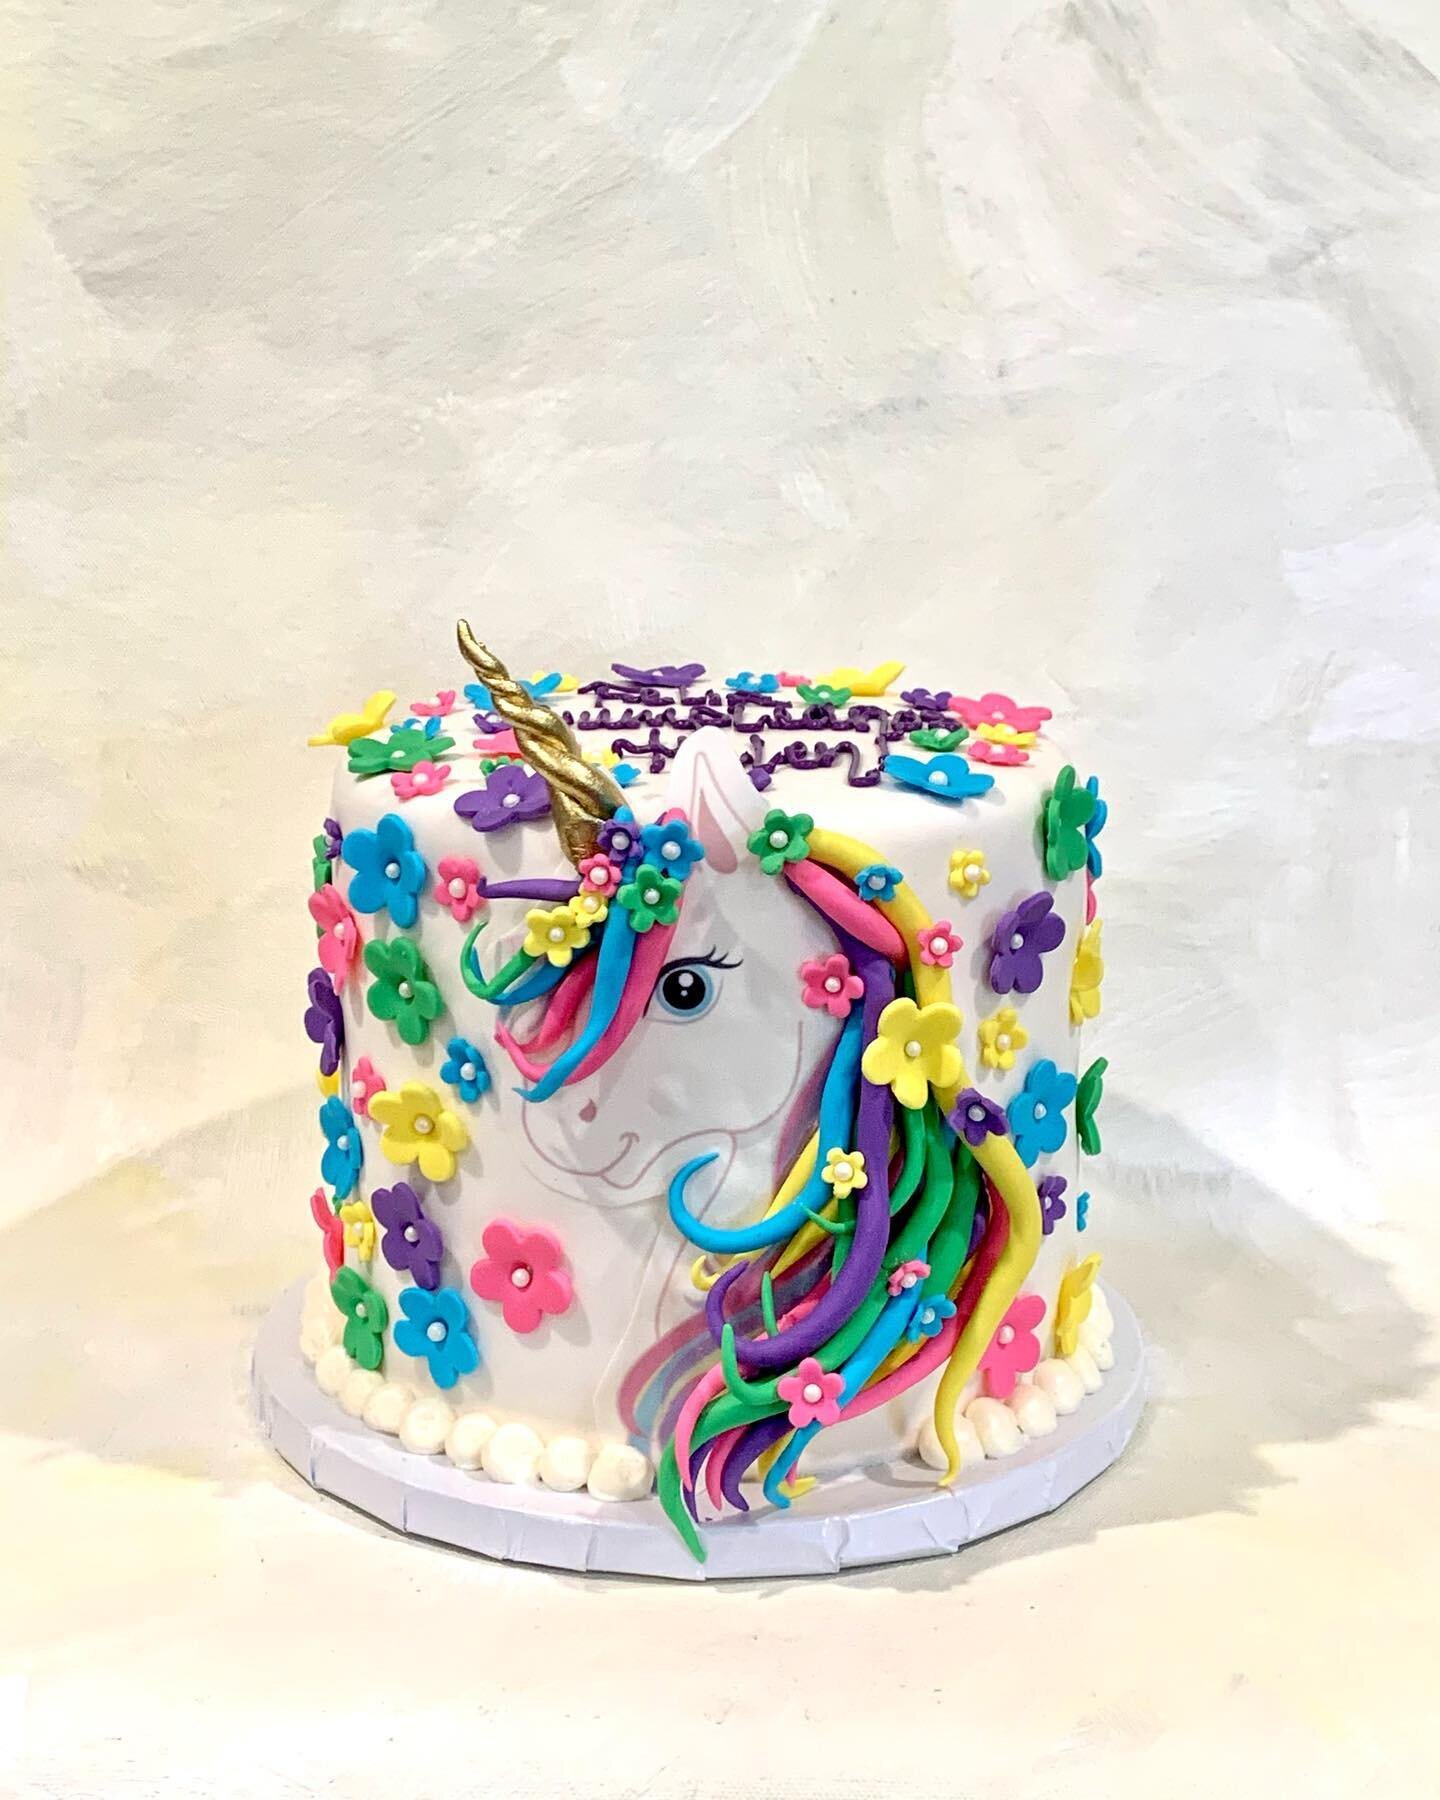 When I get an order for a kid&rsquo;s cake, I think to myself, I would have LOVED this cake as a kid! Especially with this theme, Unicorns! 🌈🦄 

My favorite character growing up was Tweety!

Who was/is your favorite character?

#dmvcakes #dmvbaker 